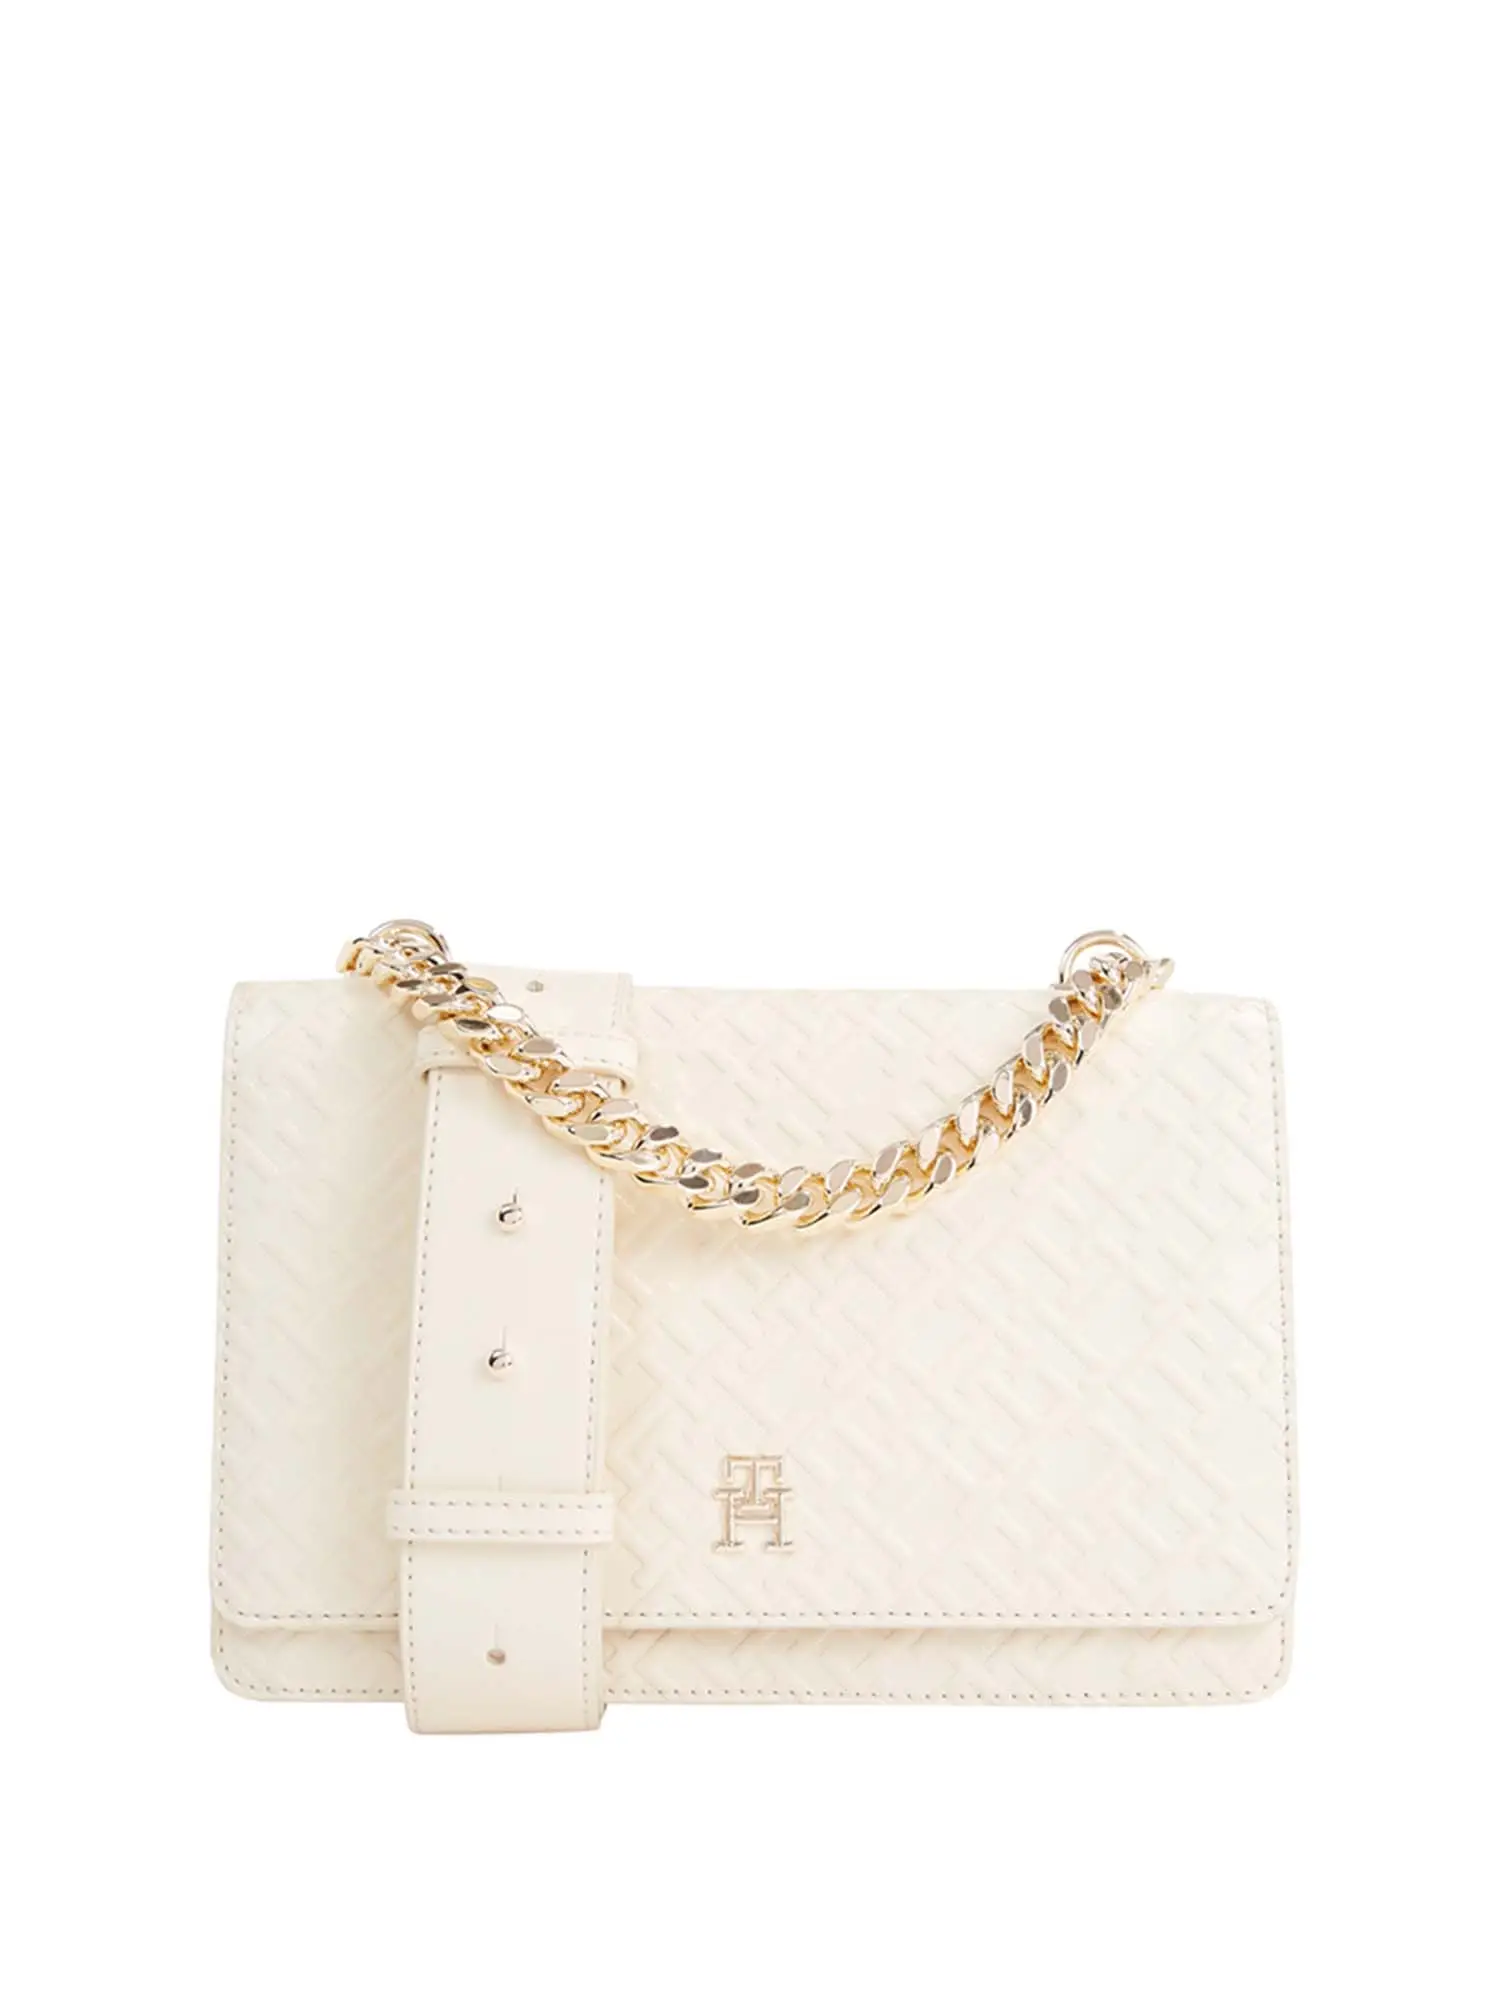 TRACOLLA DONNA - TOMMY HILFIGER - AW0AW16108 - BIANCO, UNICA